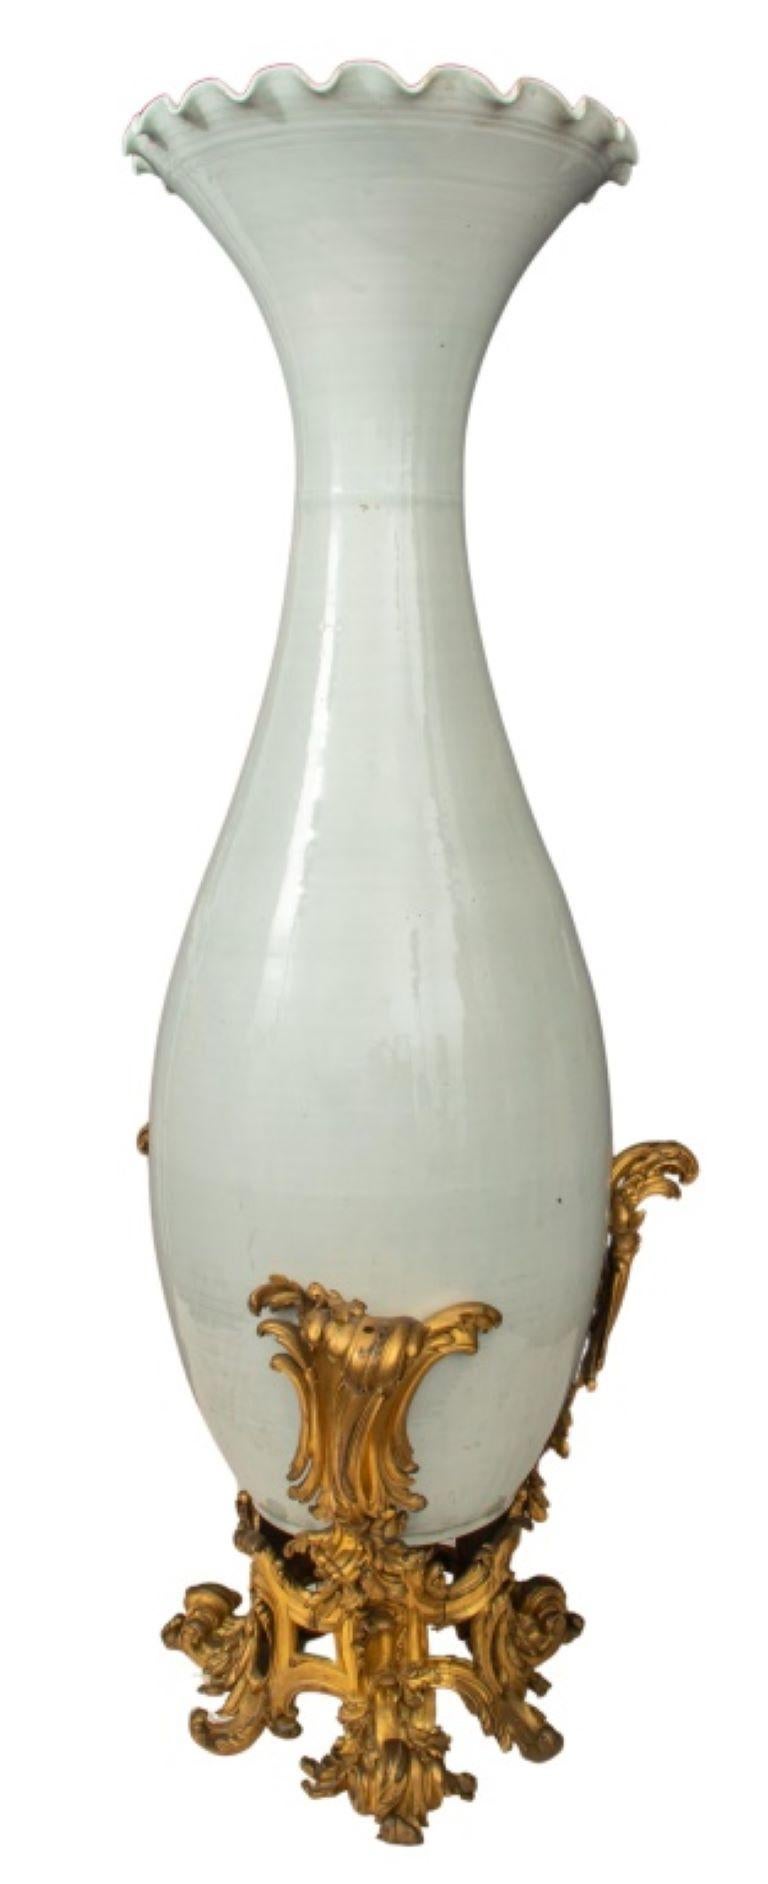 Belle Epoque ormolu-mounted Japanese palace vase in monochromatic white glazed porcelain, of elongated trumpet form with ruffled flaring rim above a long neck, the mount in the Louis XV style and composed of three palm-cast rocaille supports